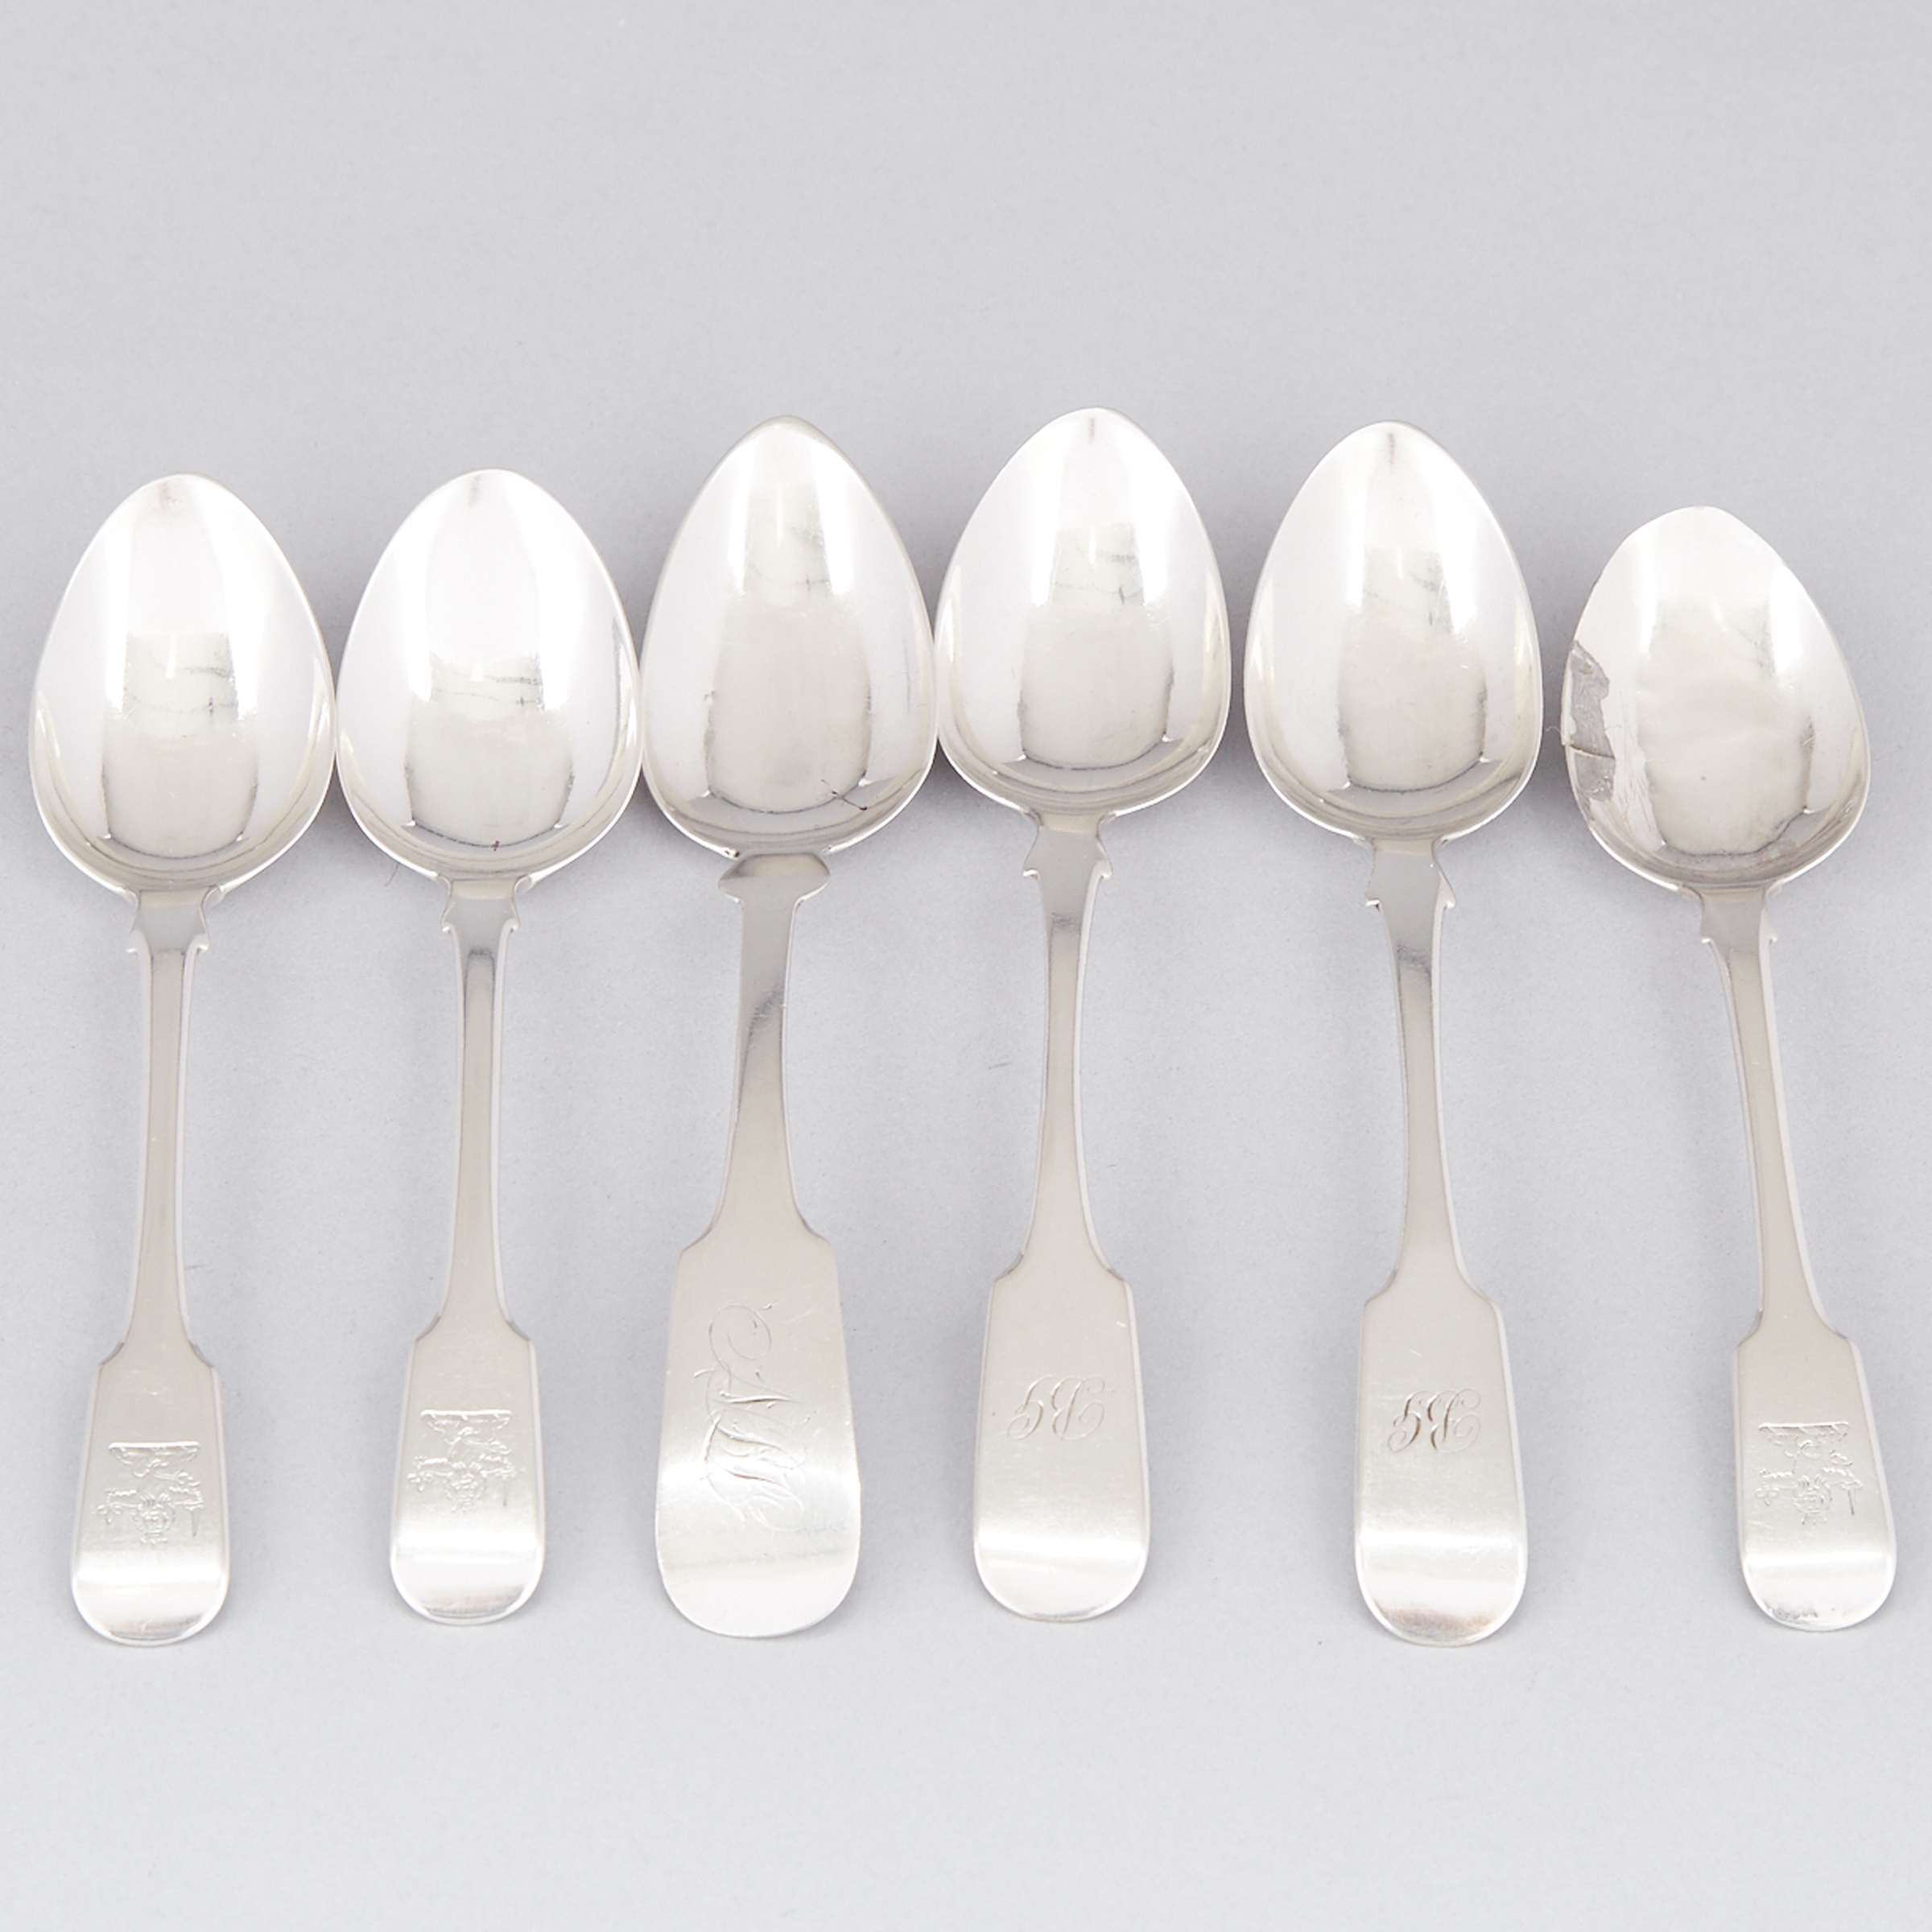 Six Canadian Silver Fiddle Pattern Tea Spoons, various Quebec makers, 19th century